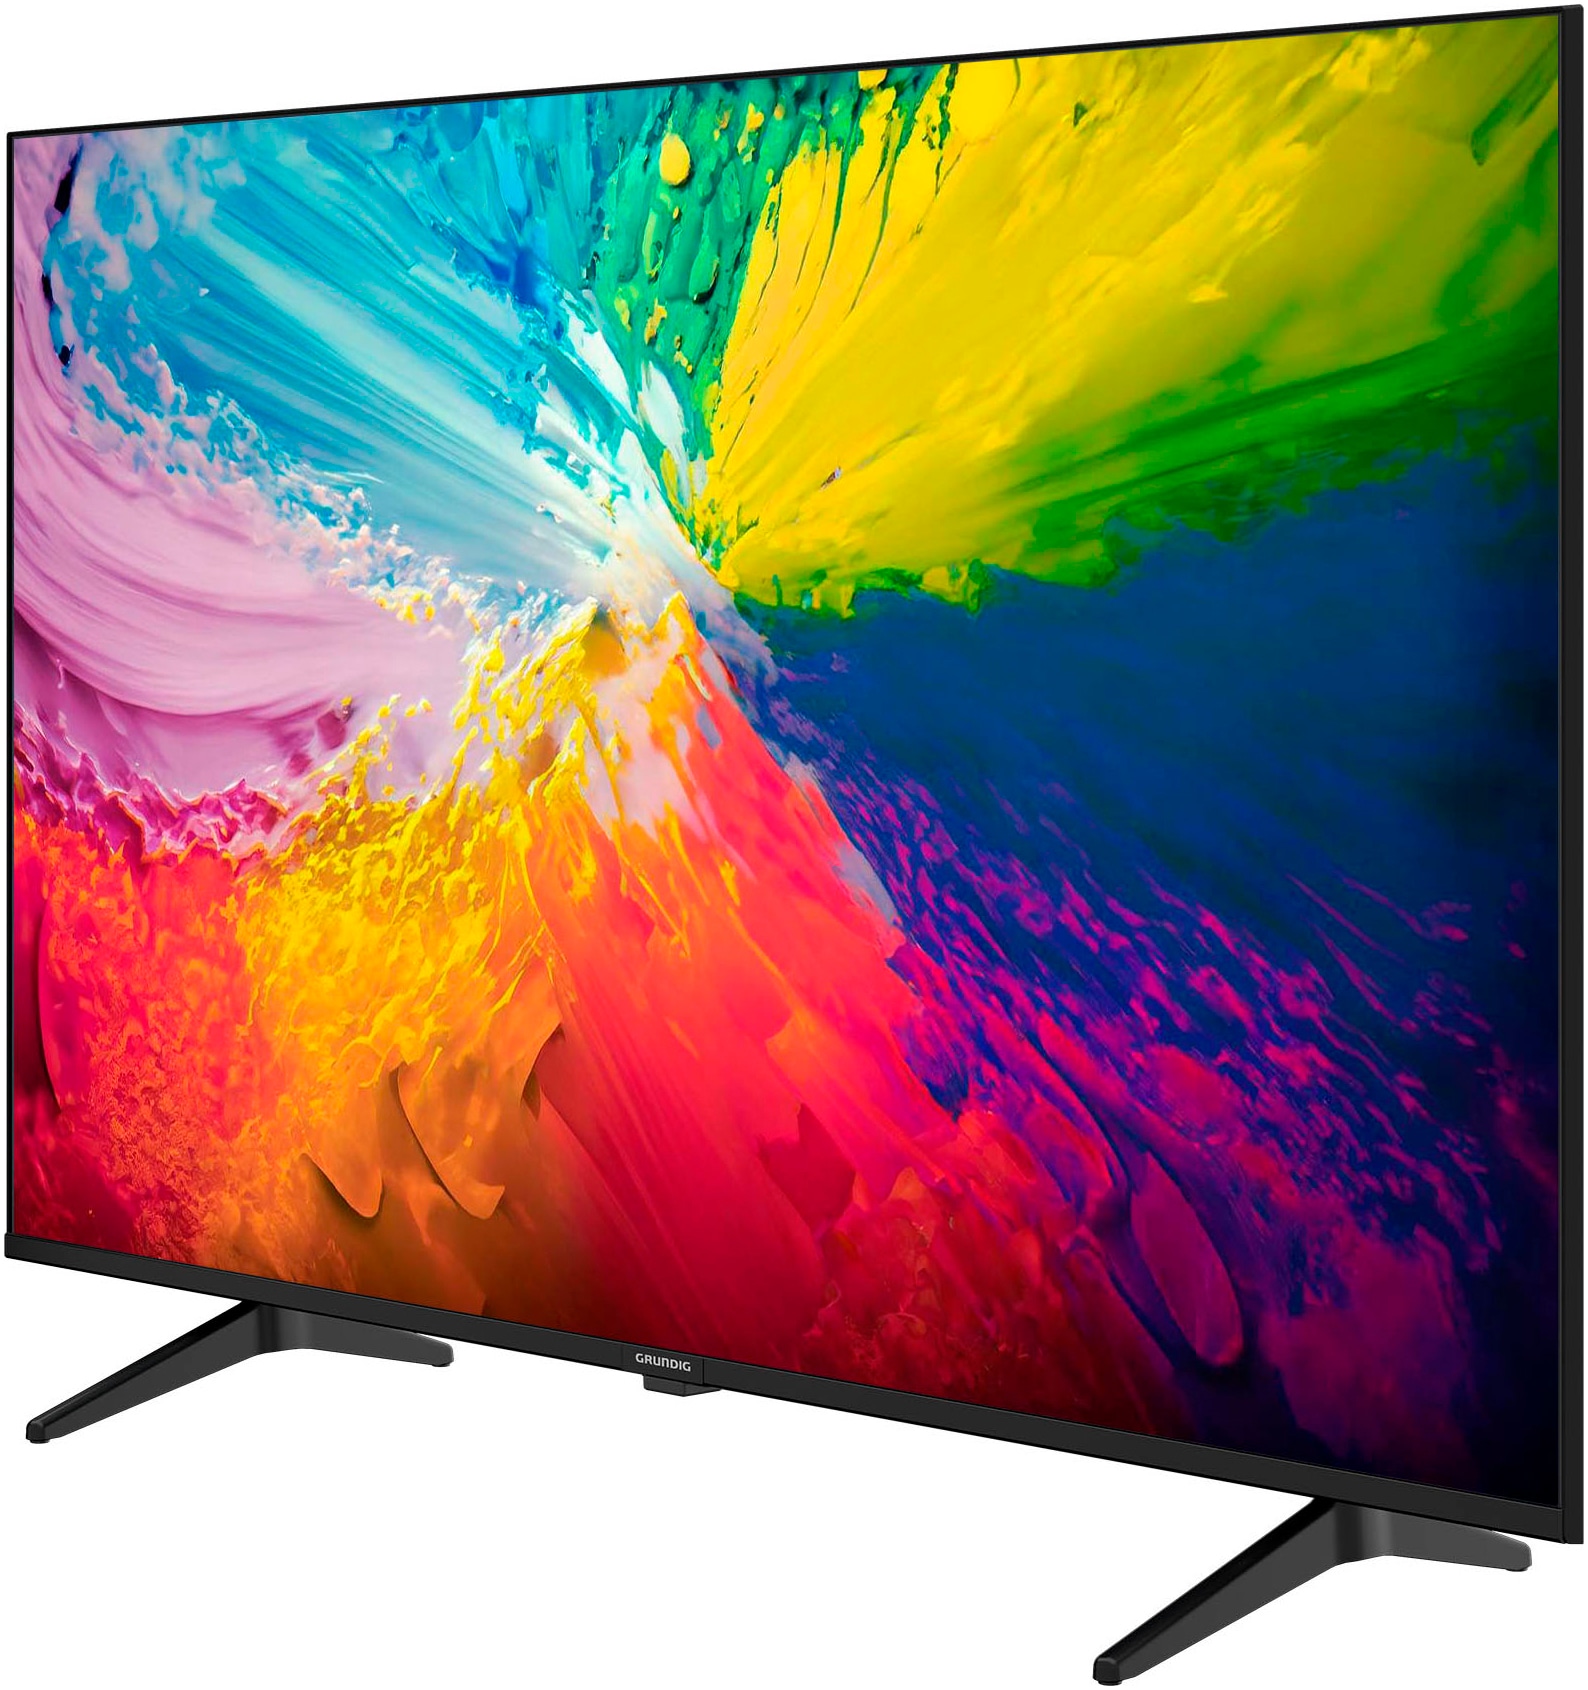 Grundig LED-Fernseher »50 VOE 73 AU6T00«, 126 cm/50 Zoll, 4K Ultra HD, Android TV